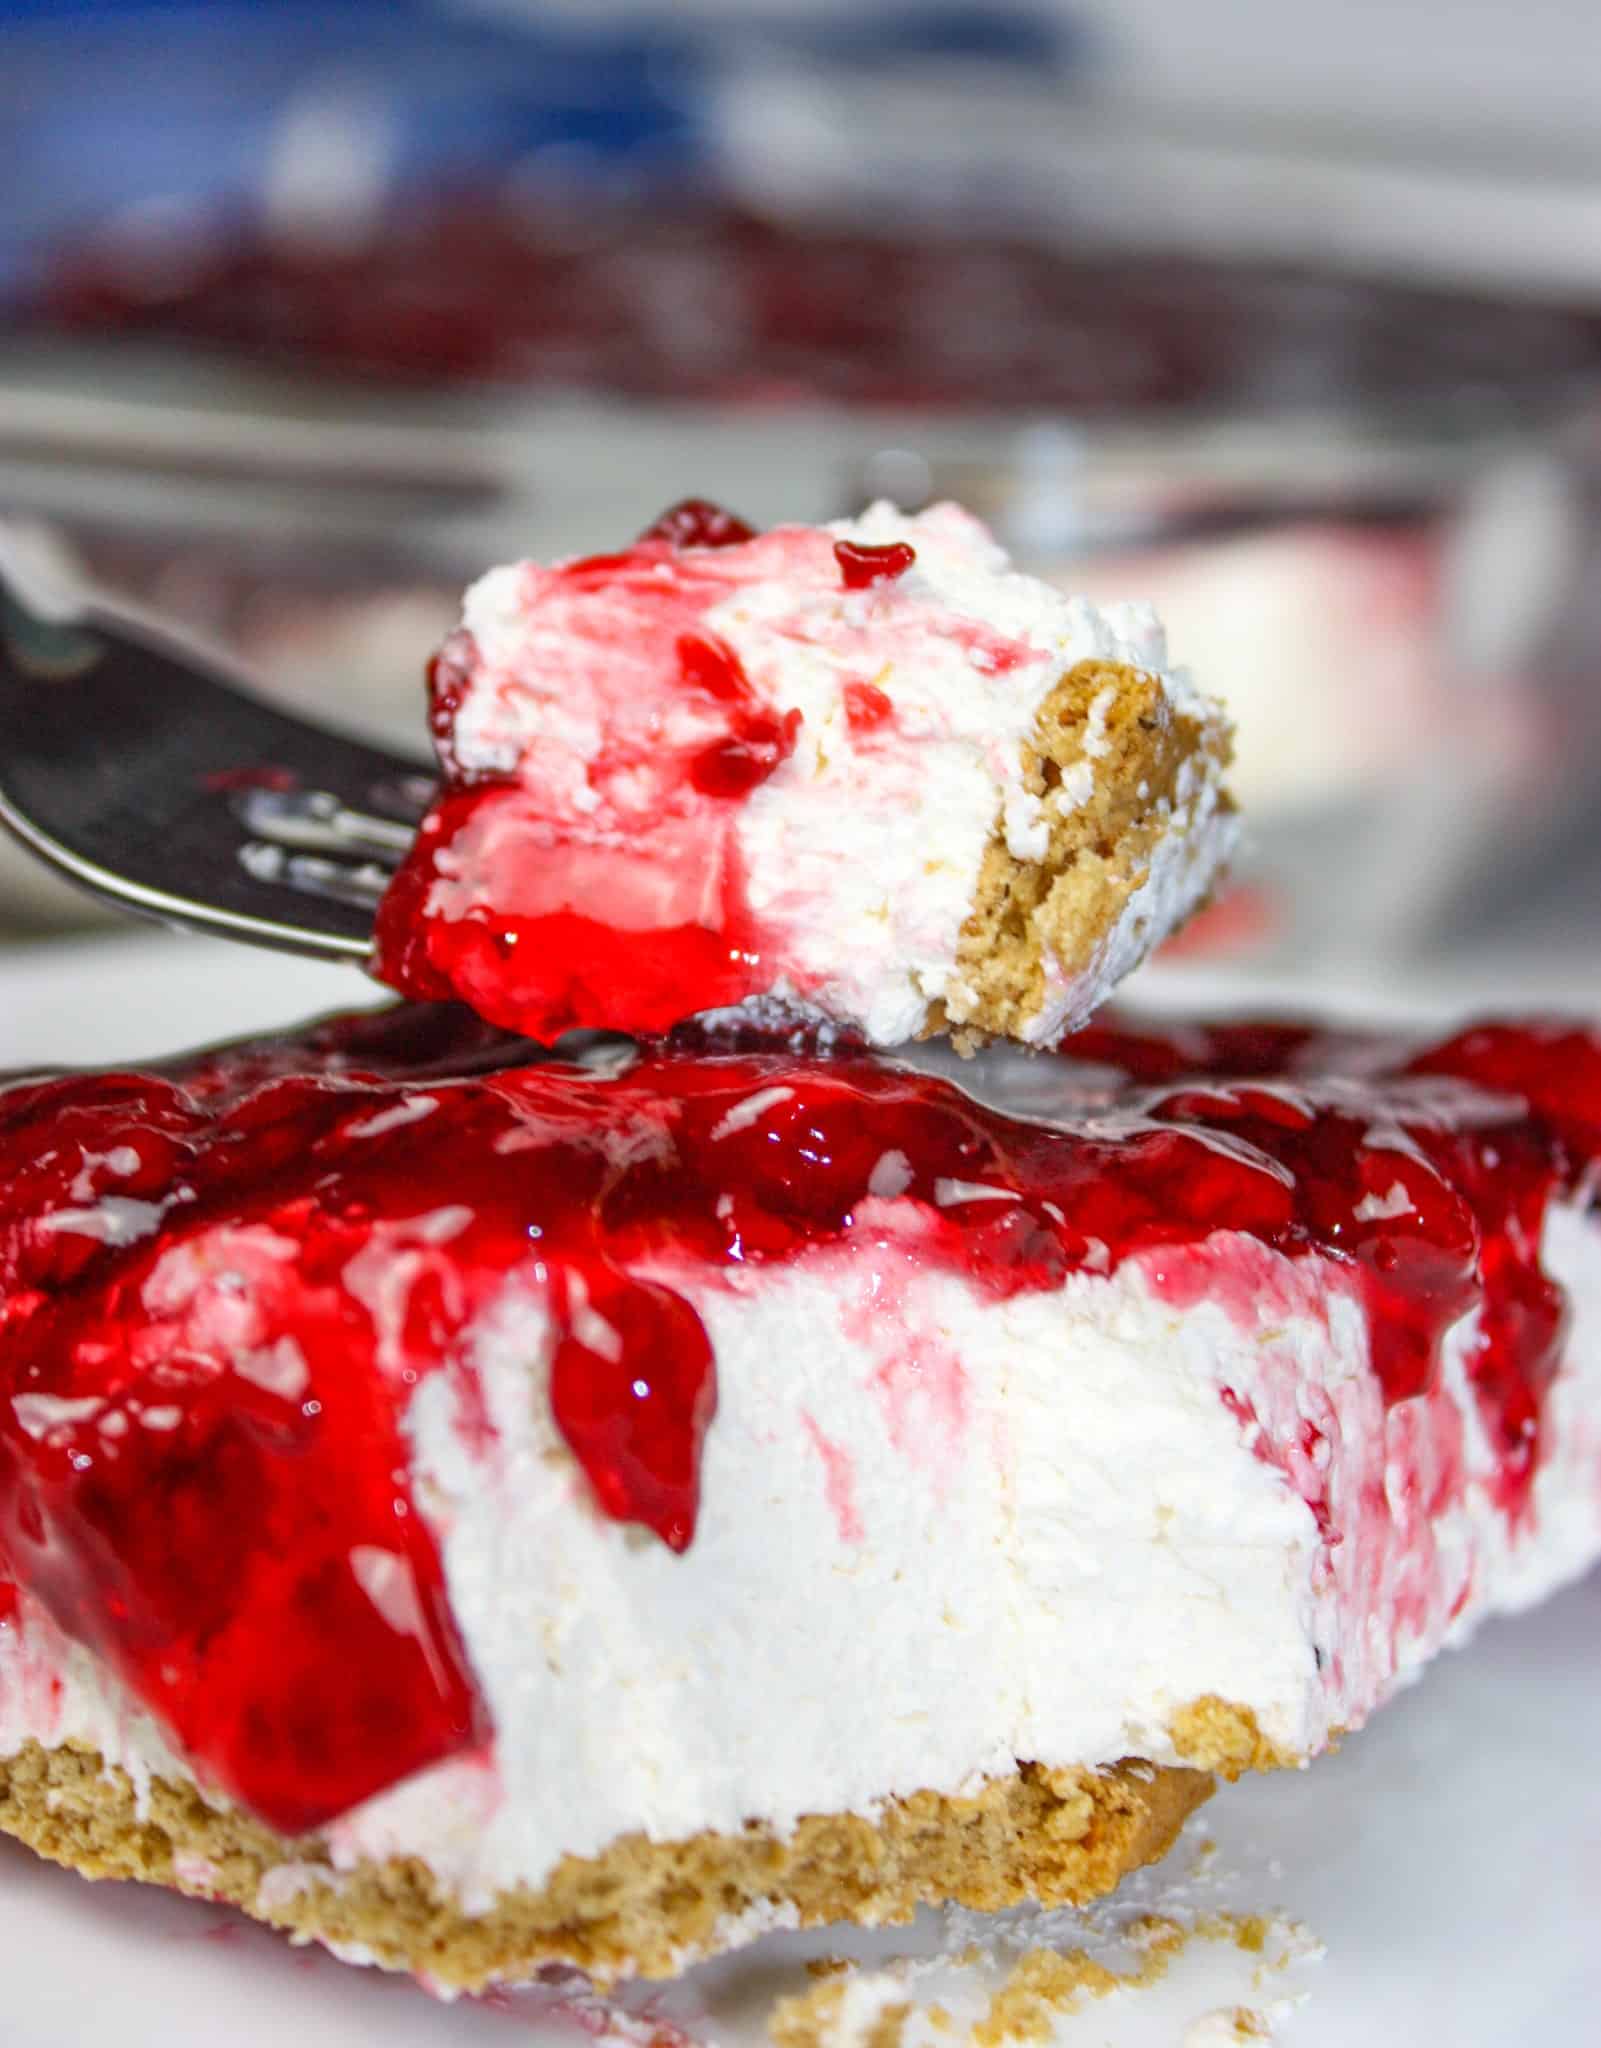 No Bake Cheesecake is a light and delicious dessert that can be topped off to suit your own tastes.  You won't believe it contains very little dairy and is gluten free!